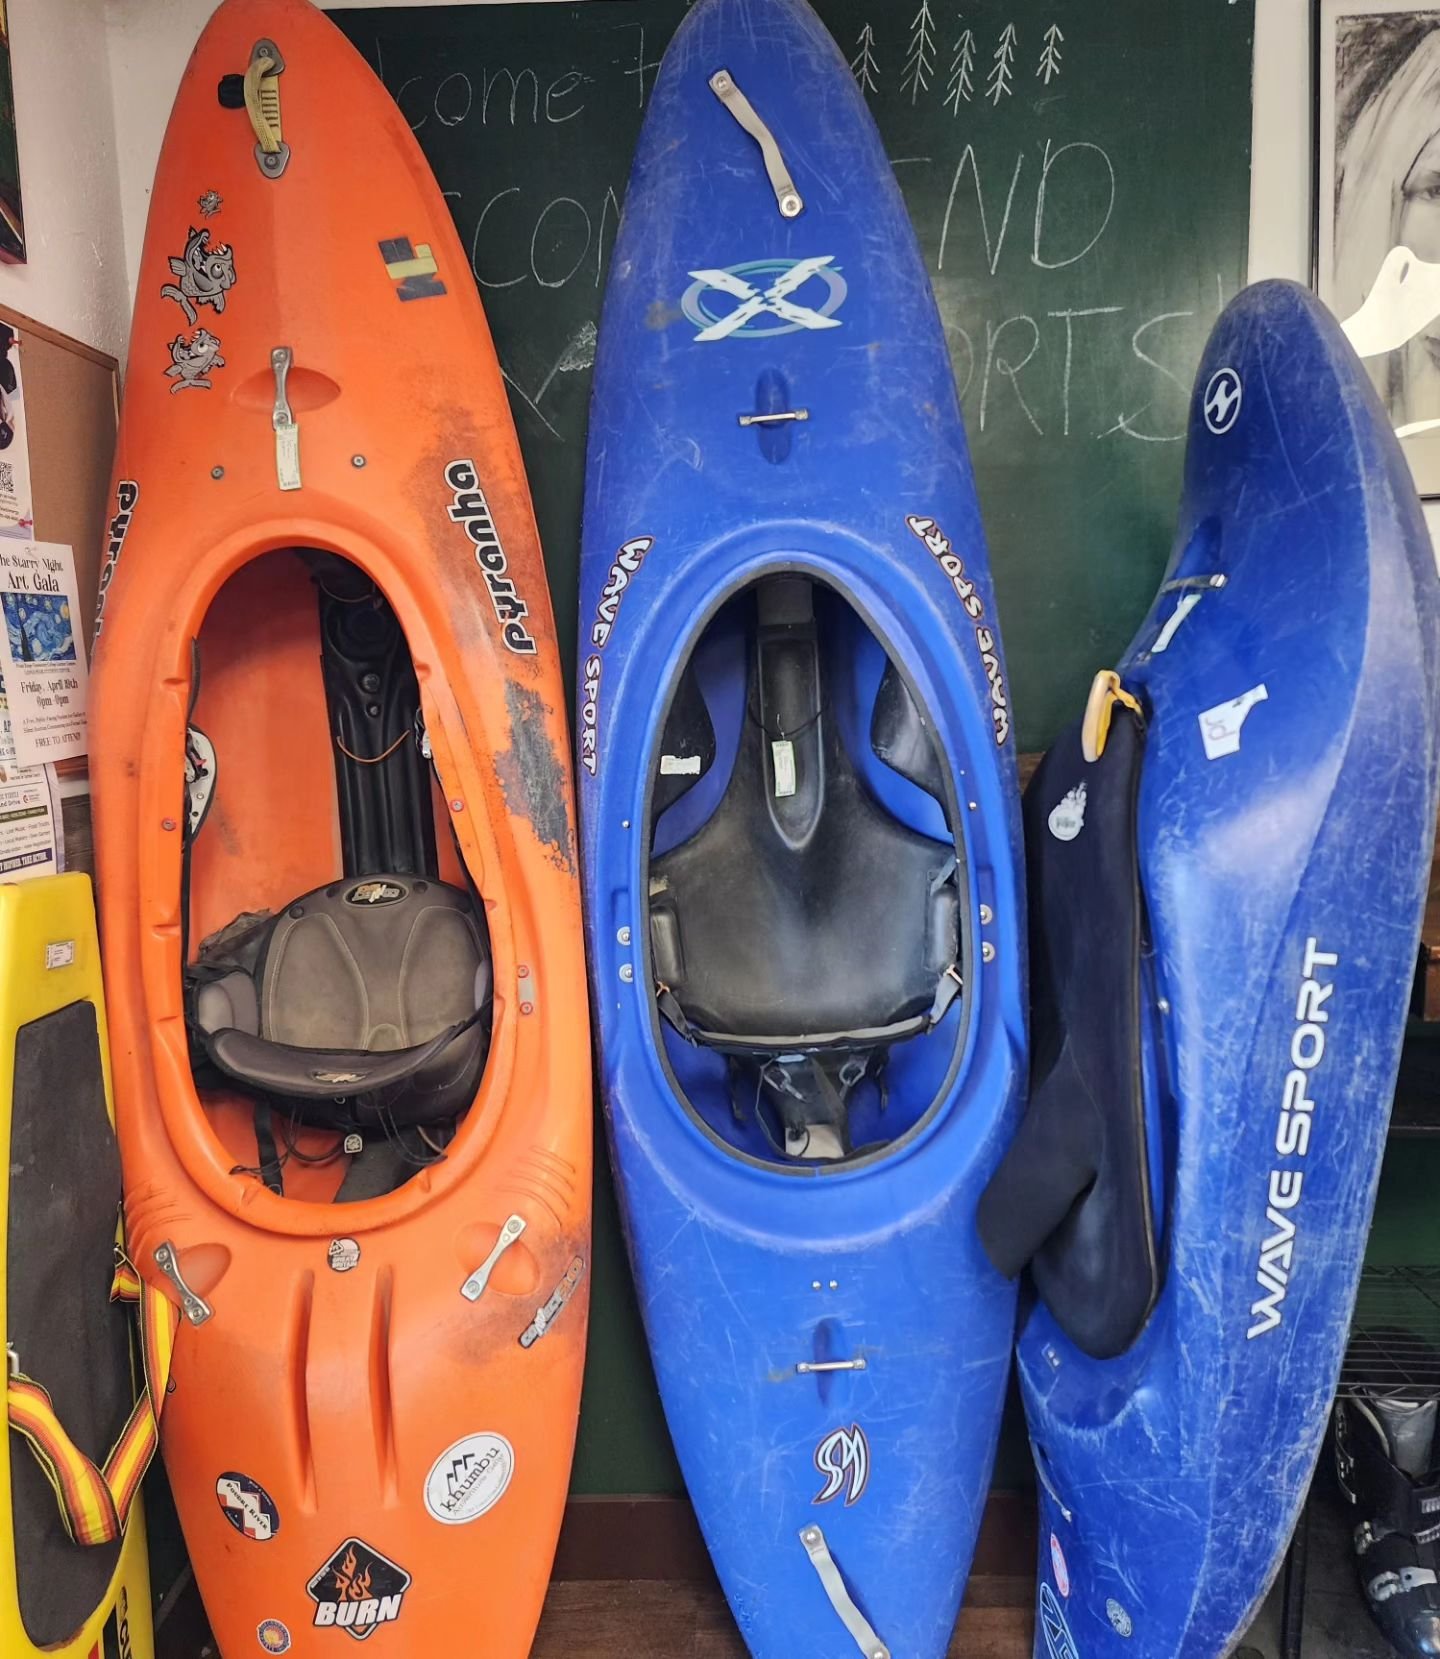 It's that time of the year! Kayaks, paddle boards, and water skis are out. Don't forget your life jacket!

Kayaks
- Pyranha Burn orange $148
- Blue wave Sport X $75
- Zero Gravity Wave Sport $175

Stand Up Paddle Boards
- (2) kids NRS AMP with Pump $